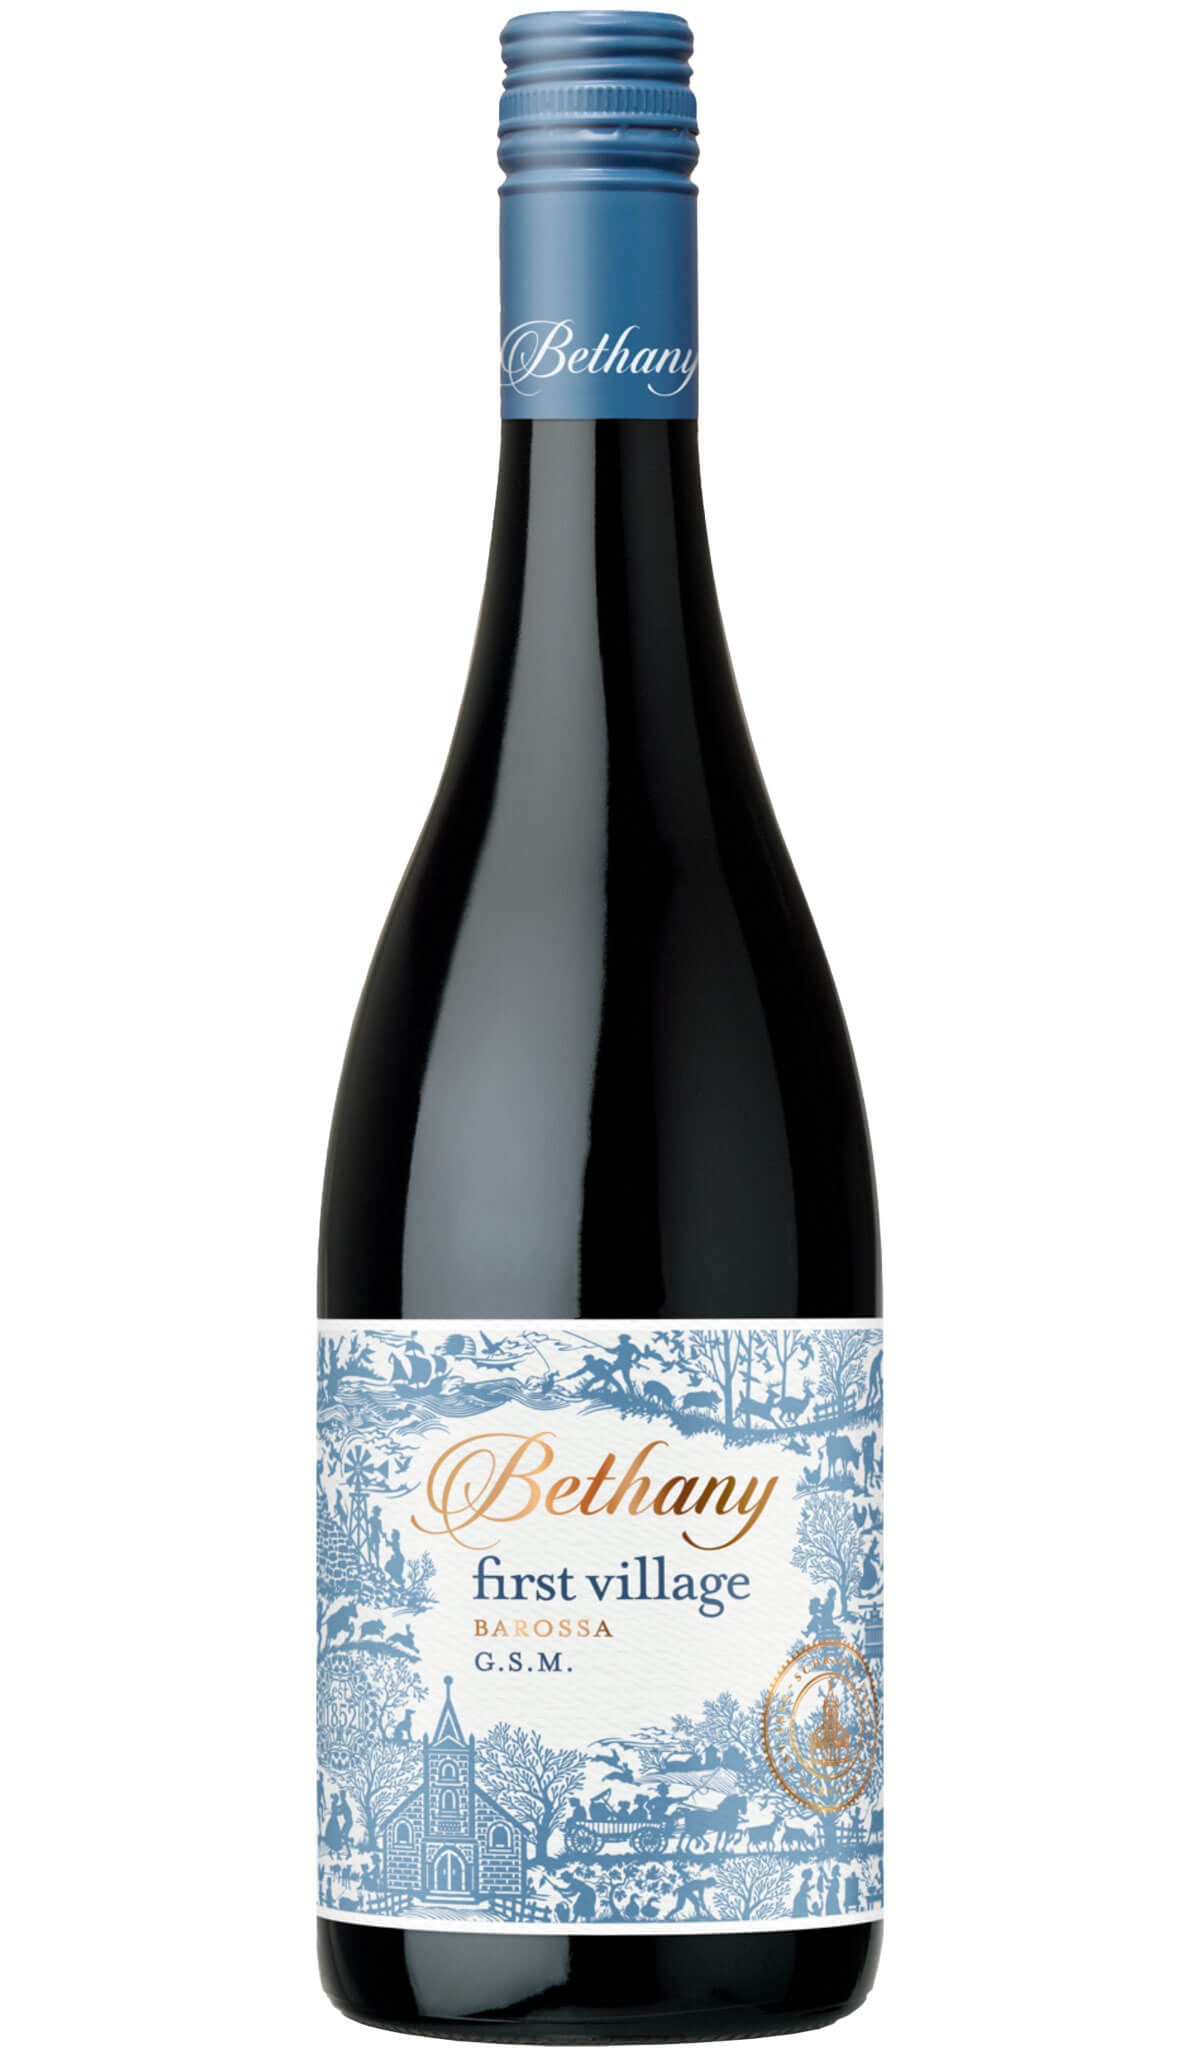 Find out more, explore the range and buy Bethany First Village GSM 2021 (Barossa Valley) available online at Wine Sellers Direct - Australia's independent liquor specialists.